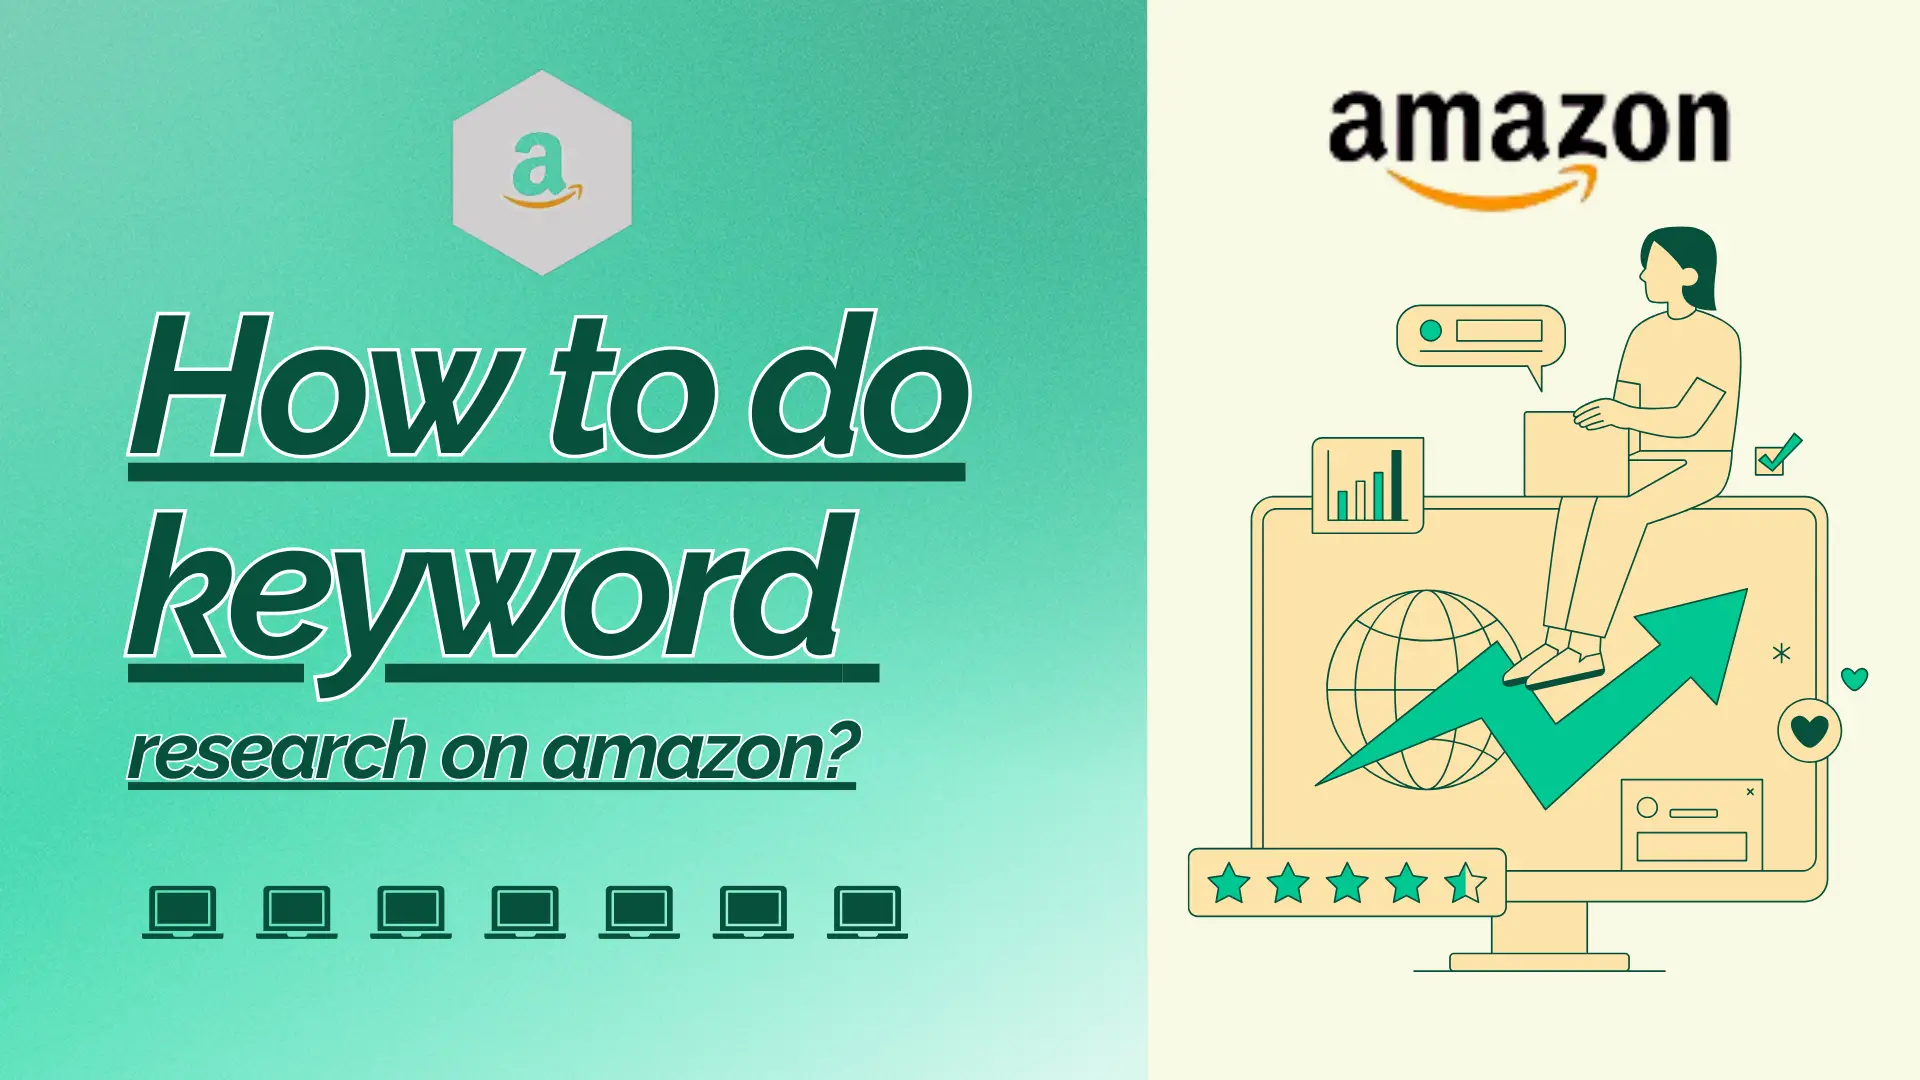 How to do keyword research on amazon?